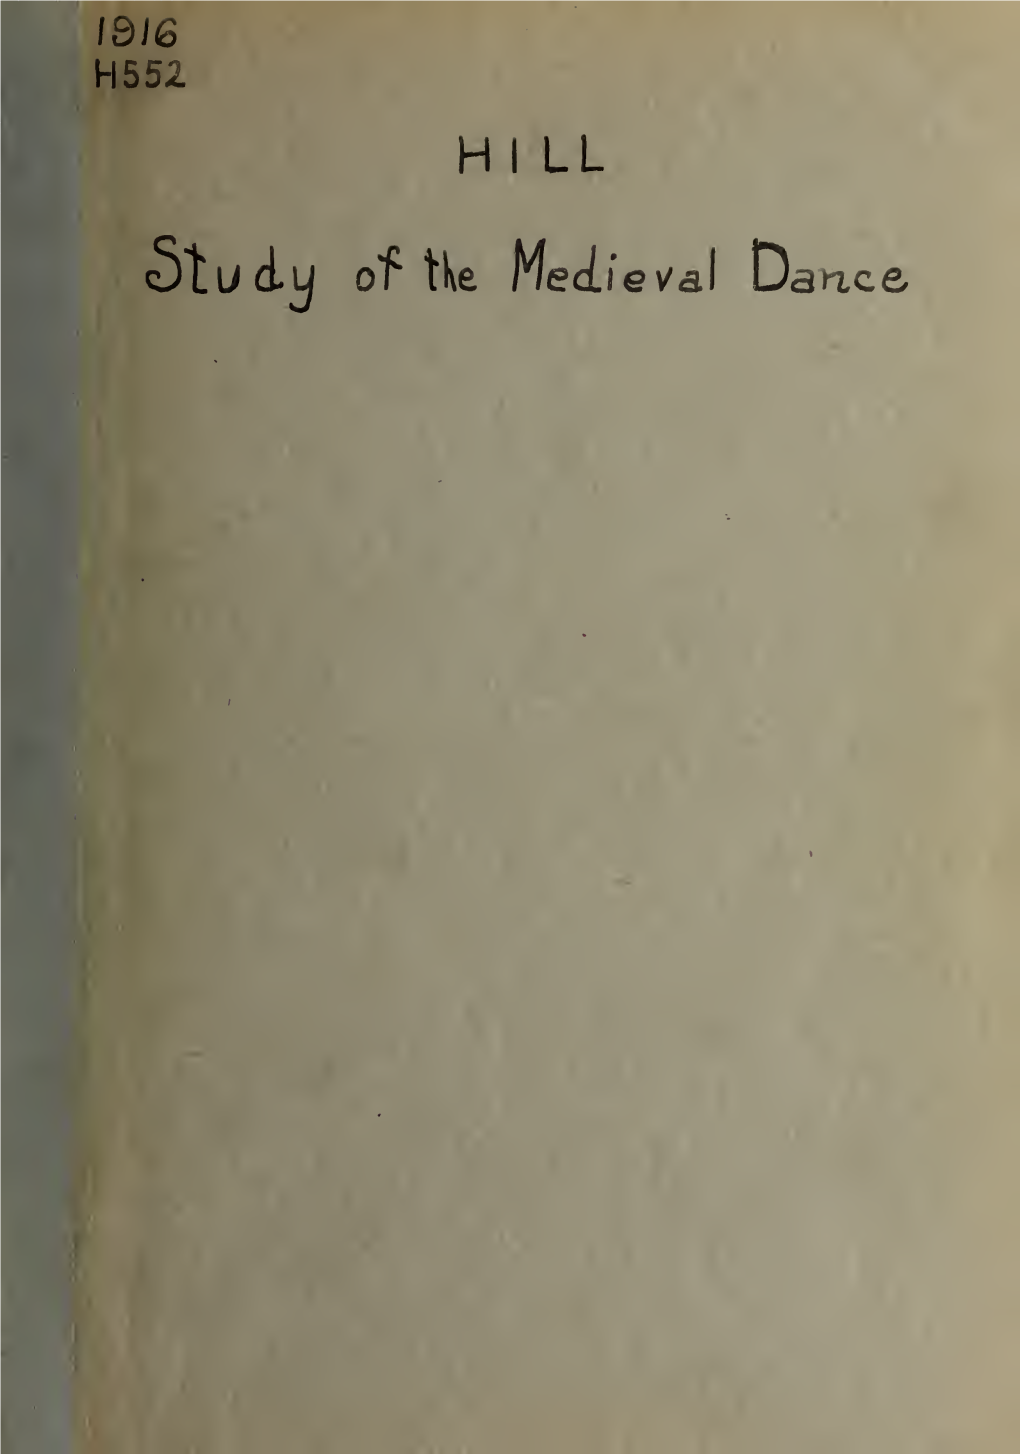 A Study of the Medieval Dance